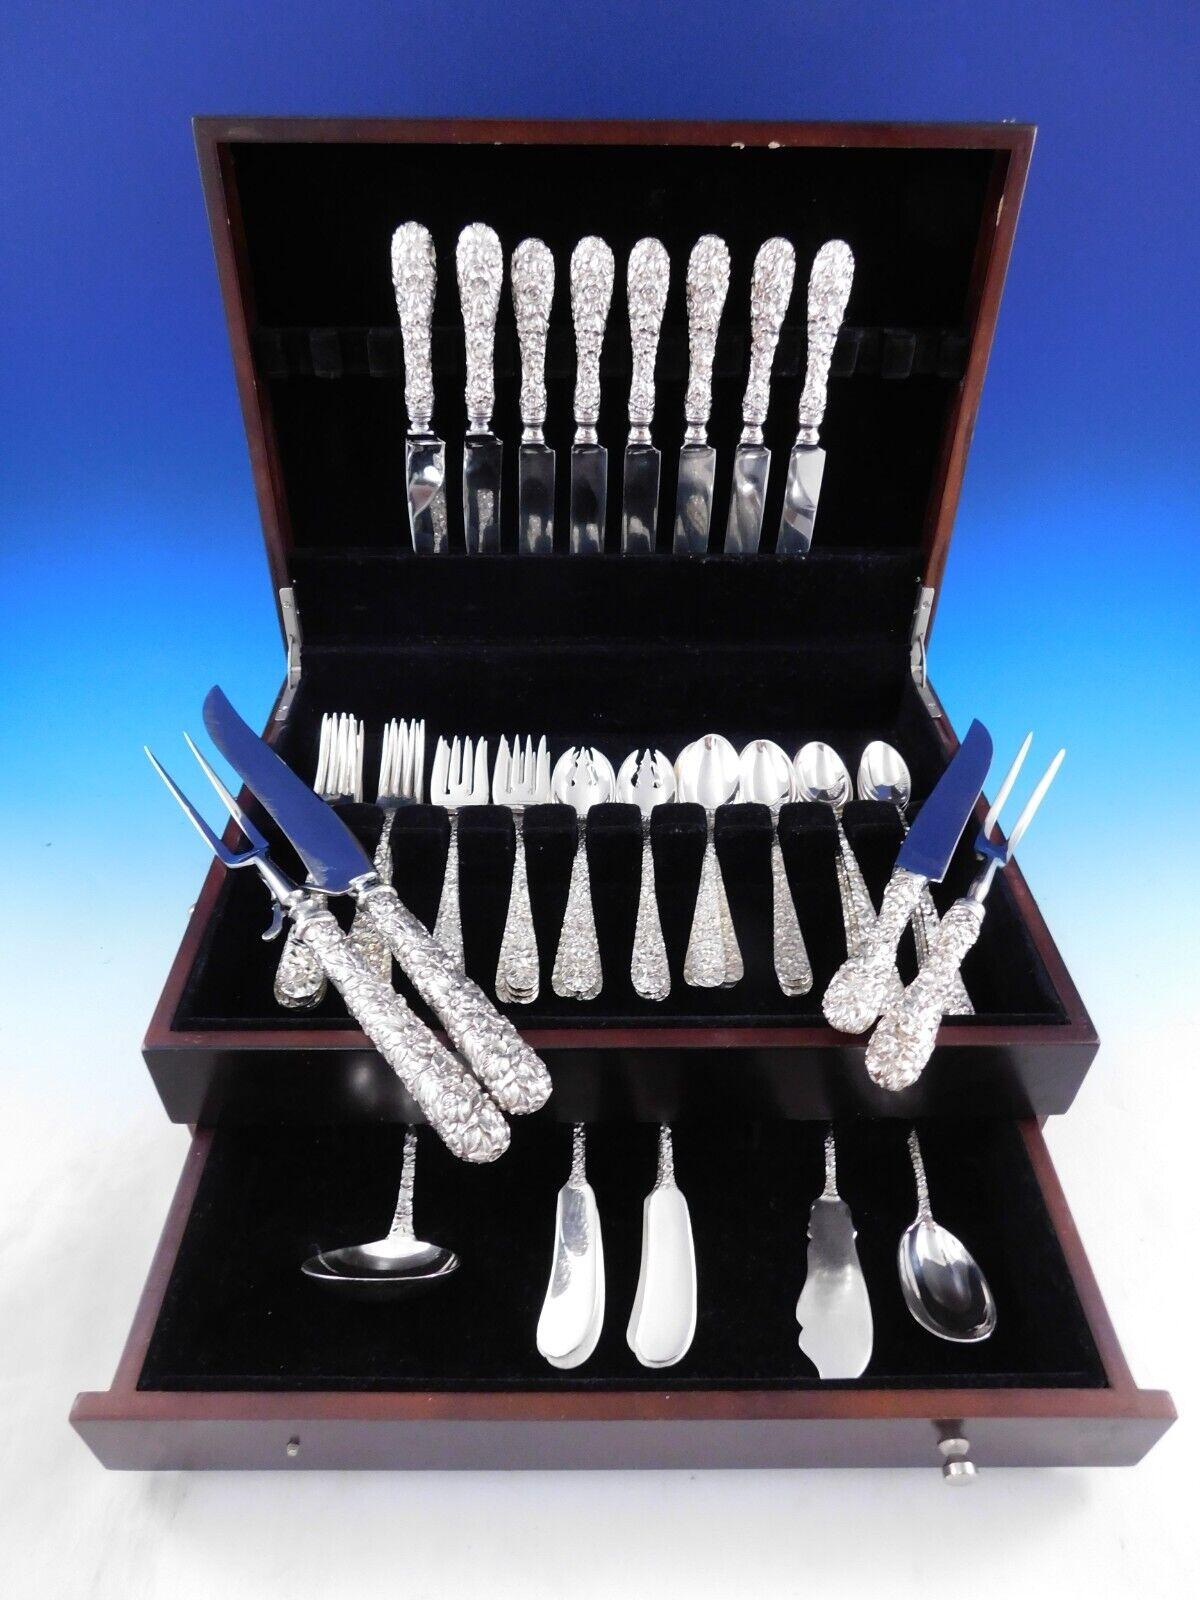 Scarce Princess by Stieff hand chased high-relief repousse sterling silver Flatware set, 55 pieces (plus 8 Rose by Stieff Teaspoons). This set includes:

8 Knives, 8 3/4